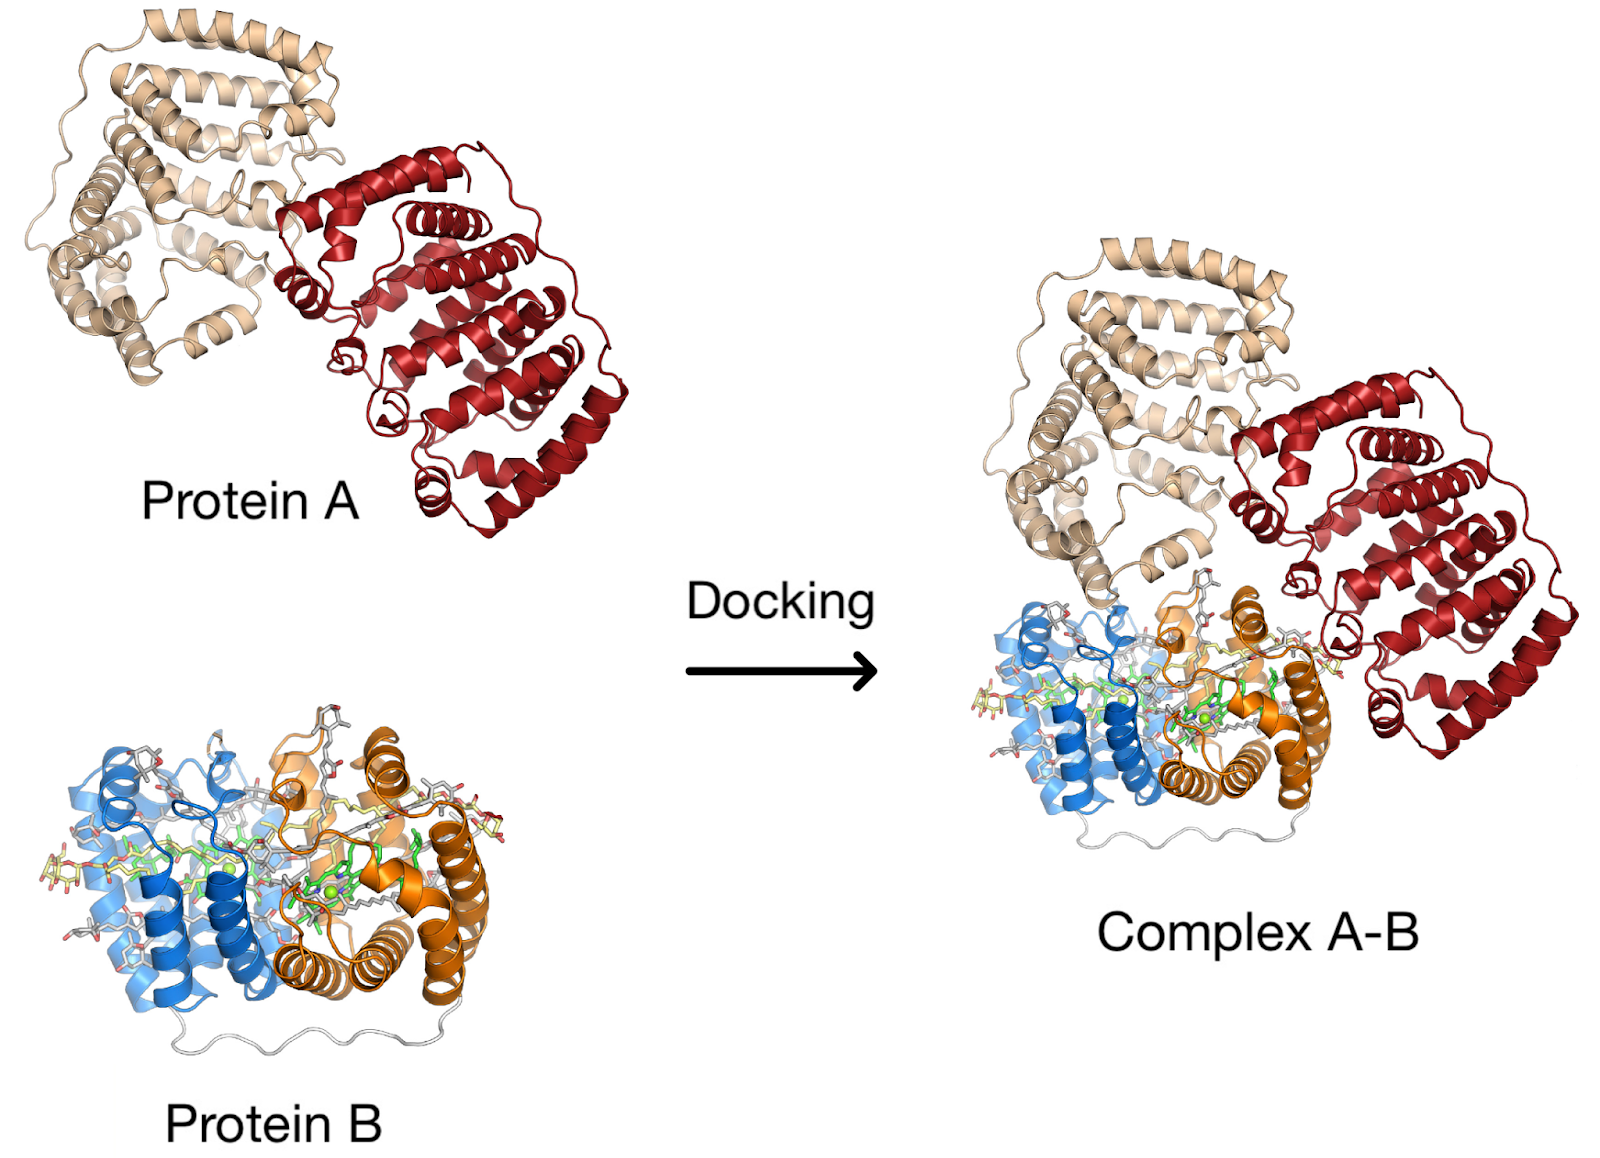 Modified image of a protein trimer formed via protein-protein docking by Opabinia Regalis.